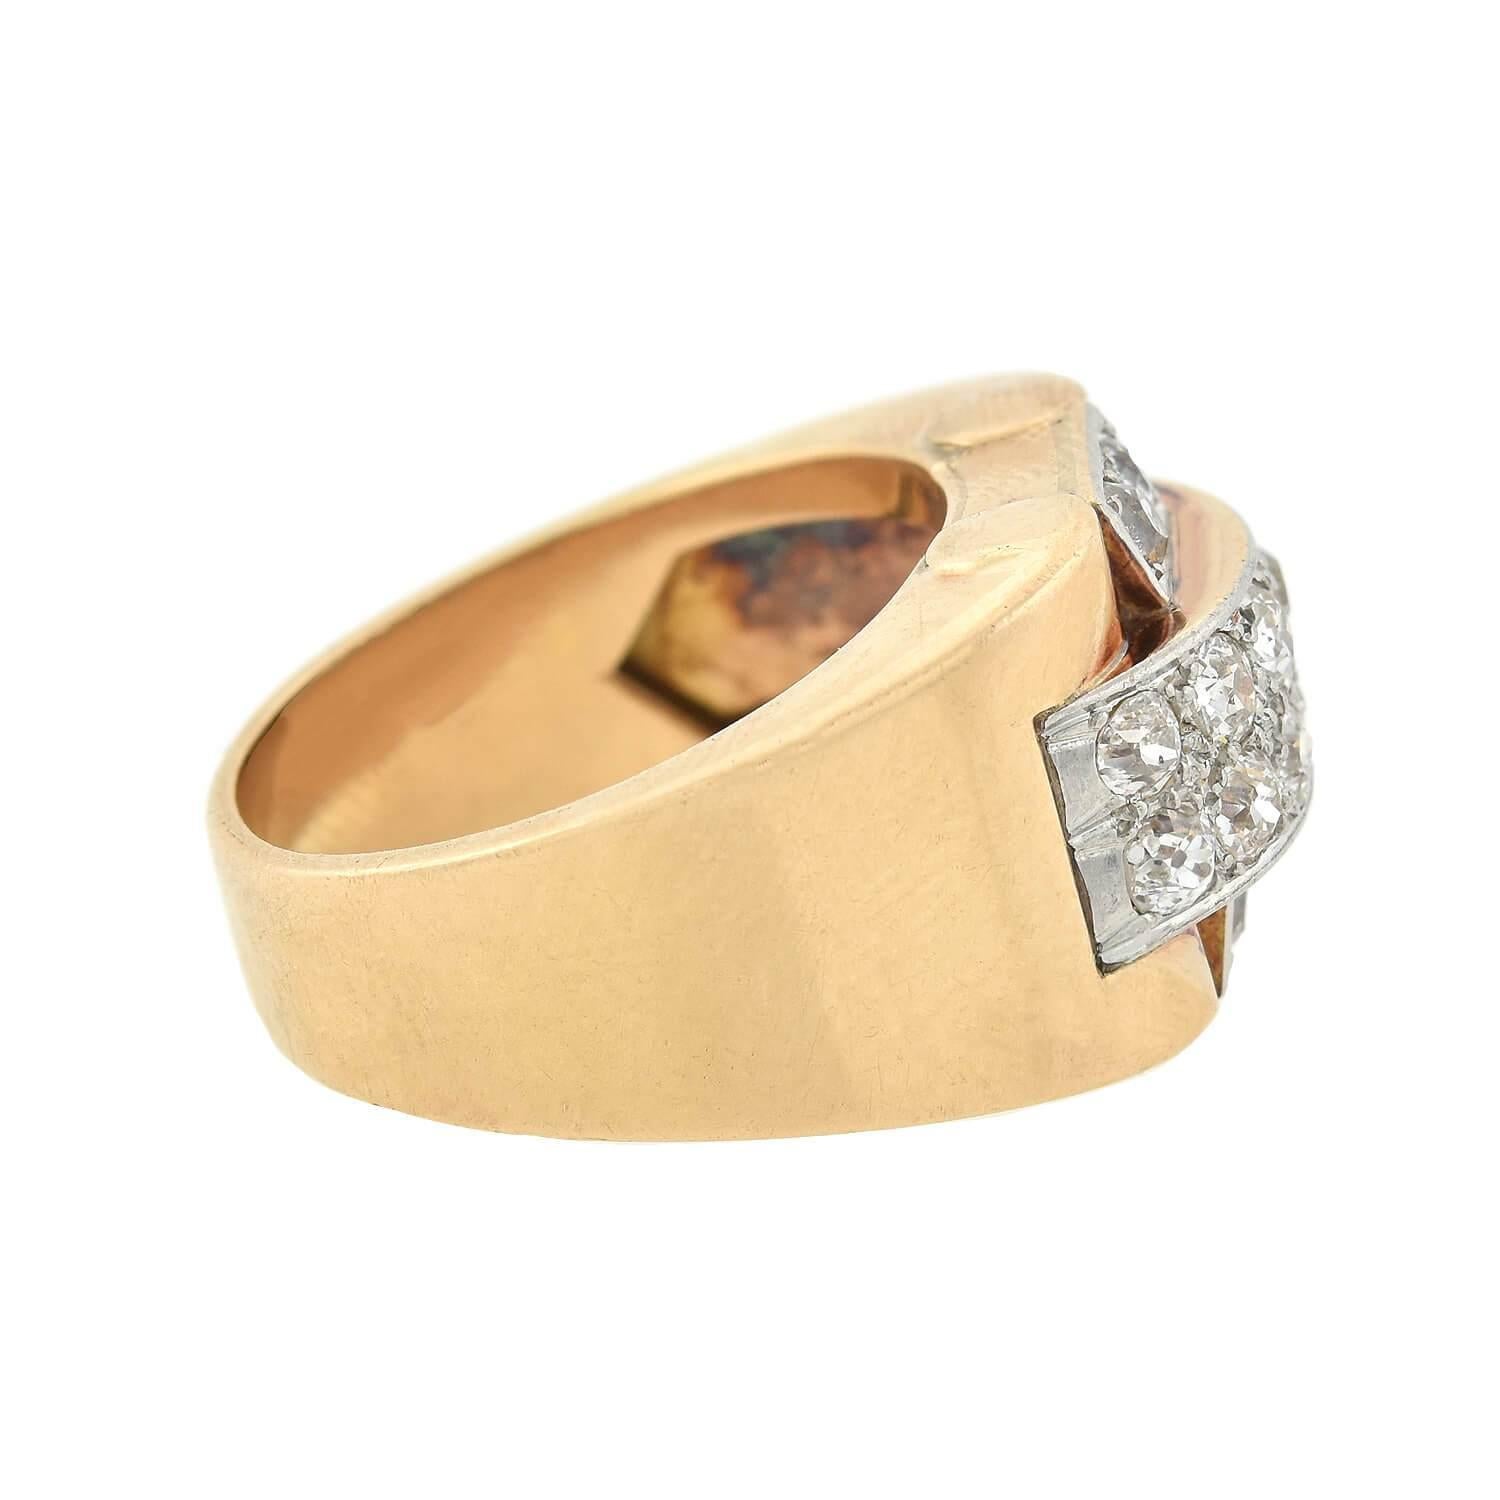 A fabulous and bold ring from the Art Deco (ca1930s) era! Crafted in rosy 14kt yellow gold, this ring boasts a platinum-topped bridge of diamonds. 16 Old Mine Cut diamonds decorate the overlapping pattern, displaying approximately 1.50ctw of I/J